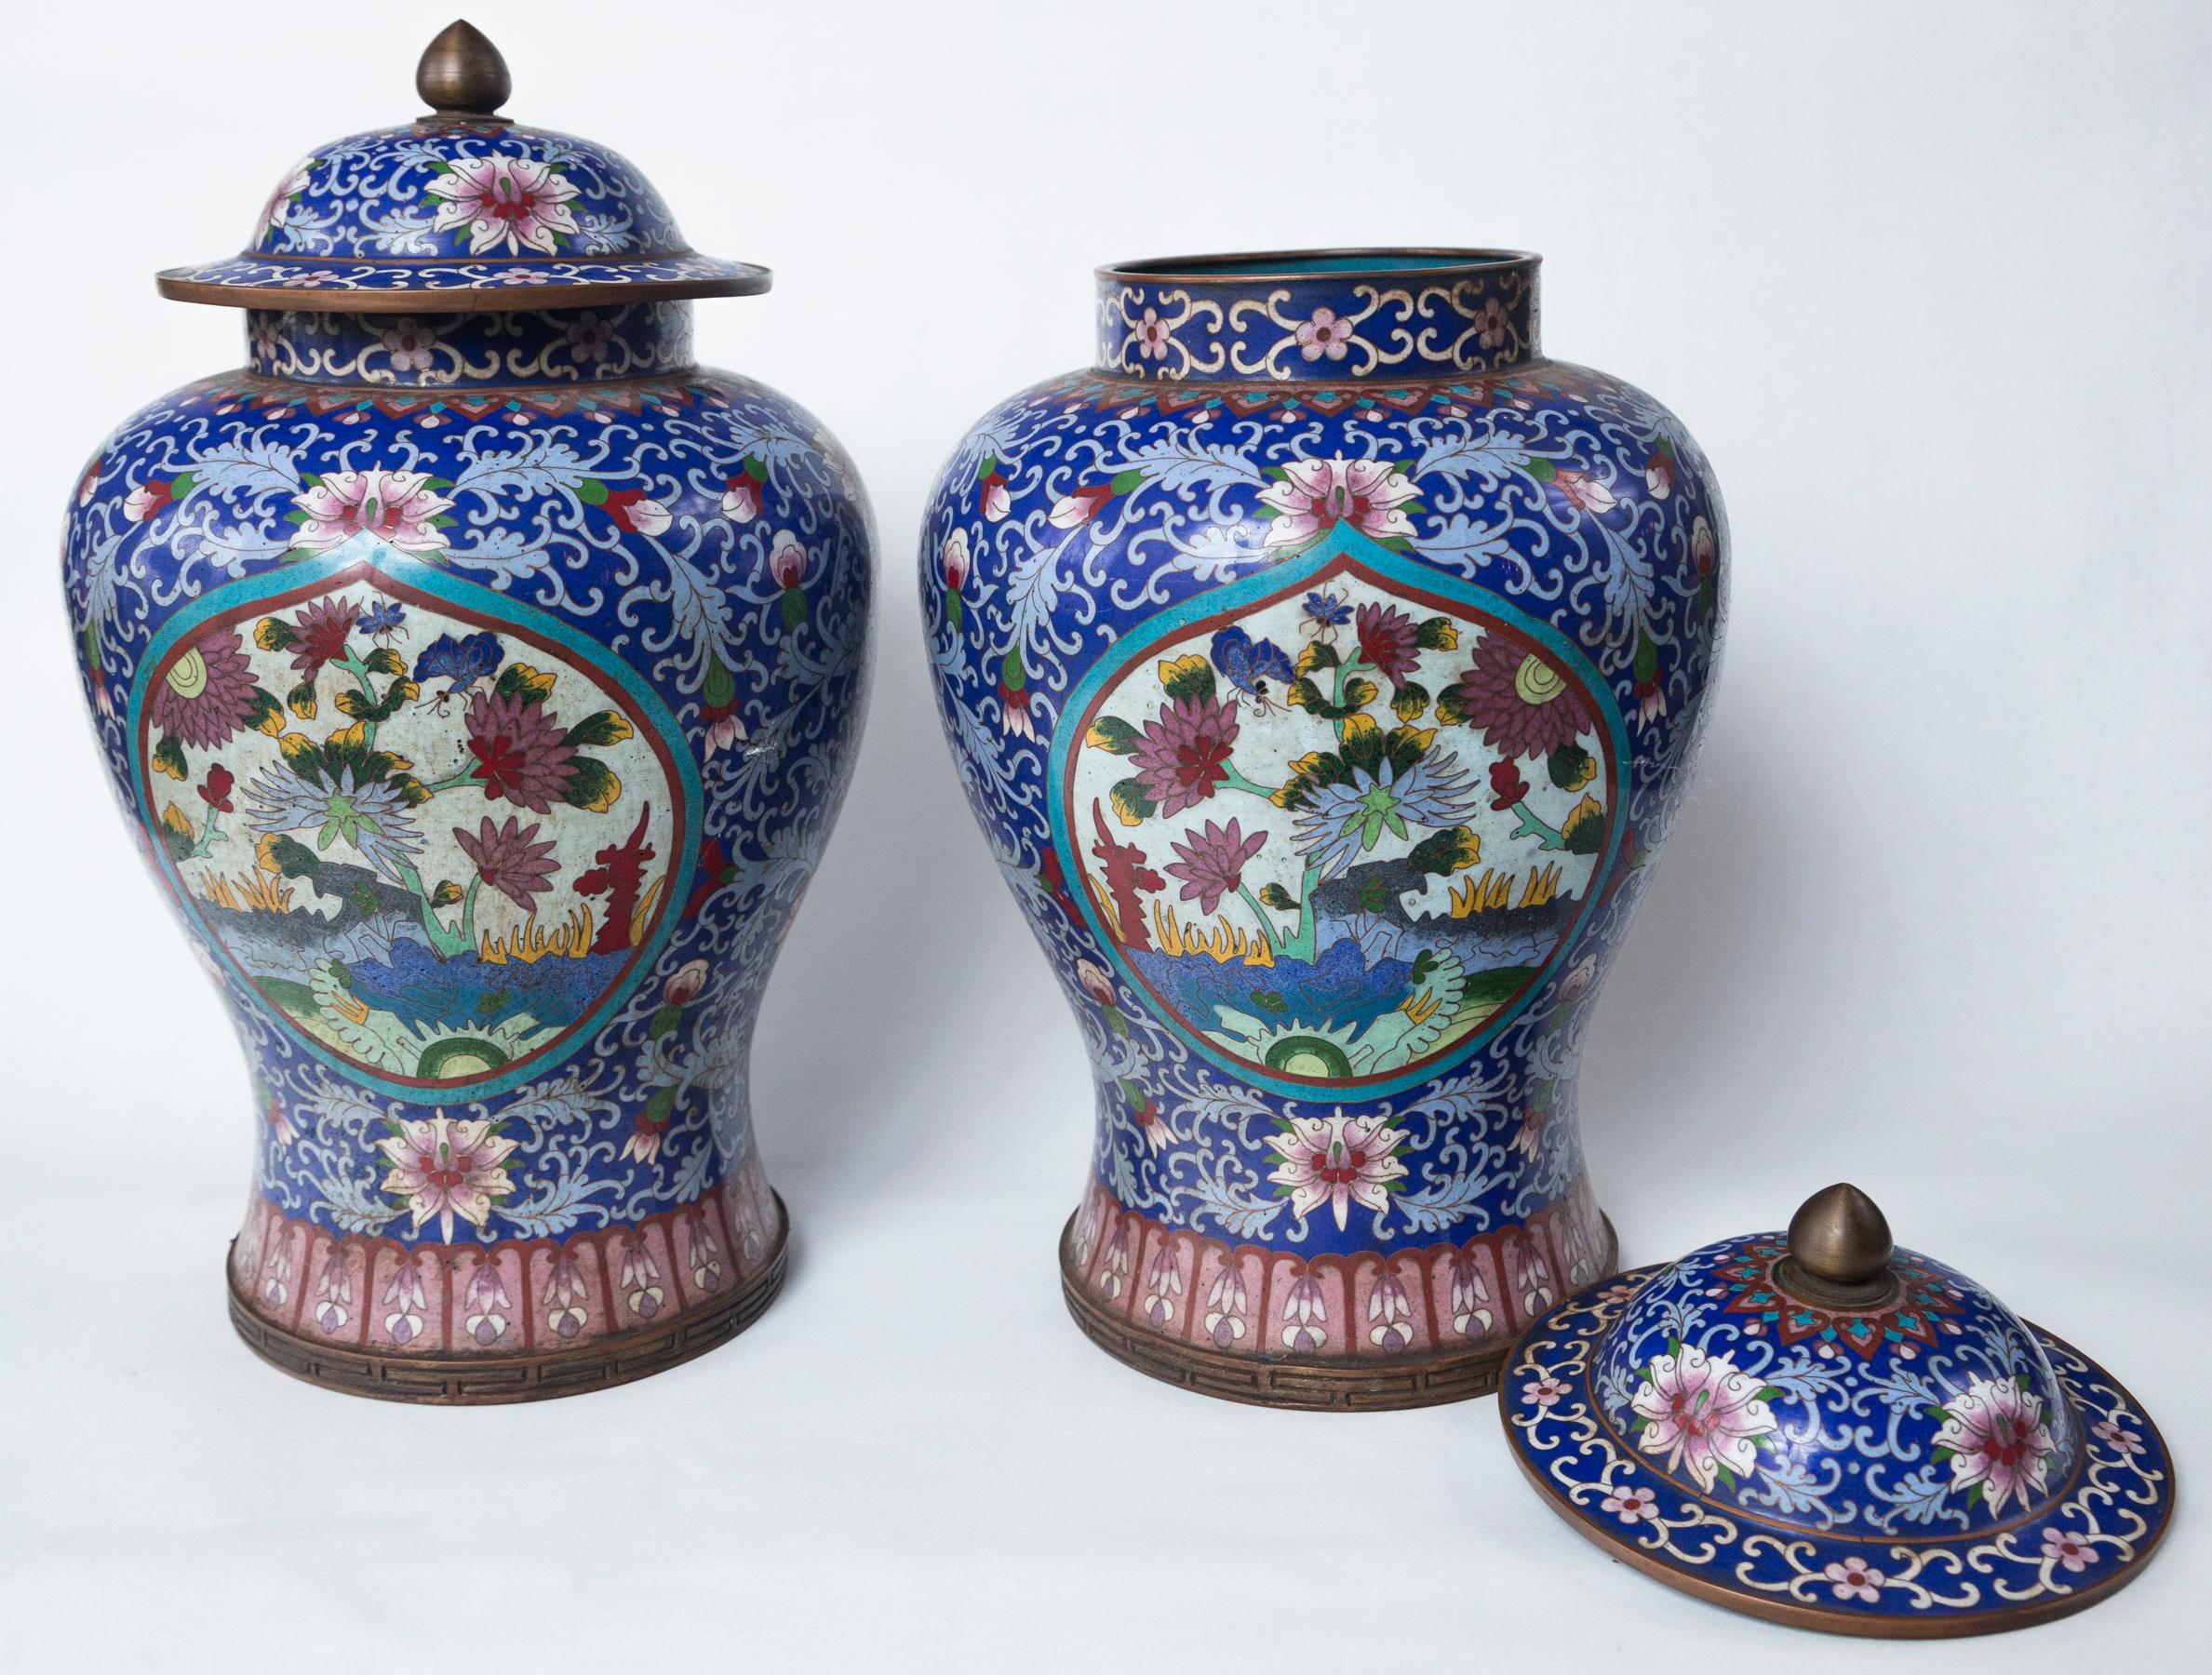 20th Century Pair of Asian Cloisonne Lidded Jars For Sale